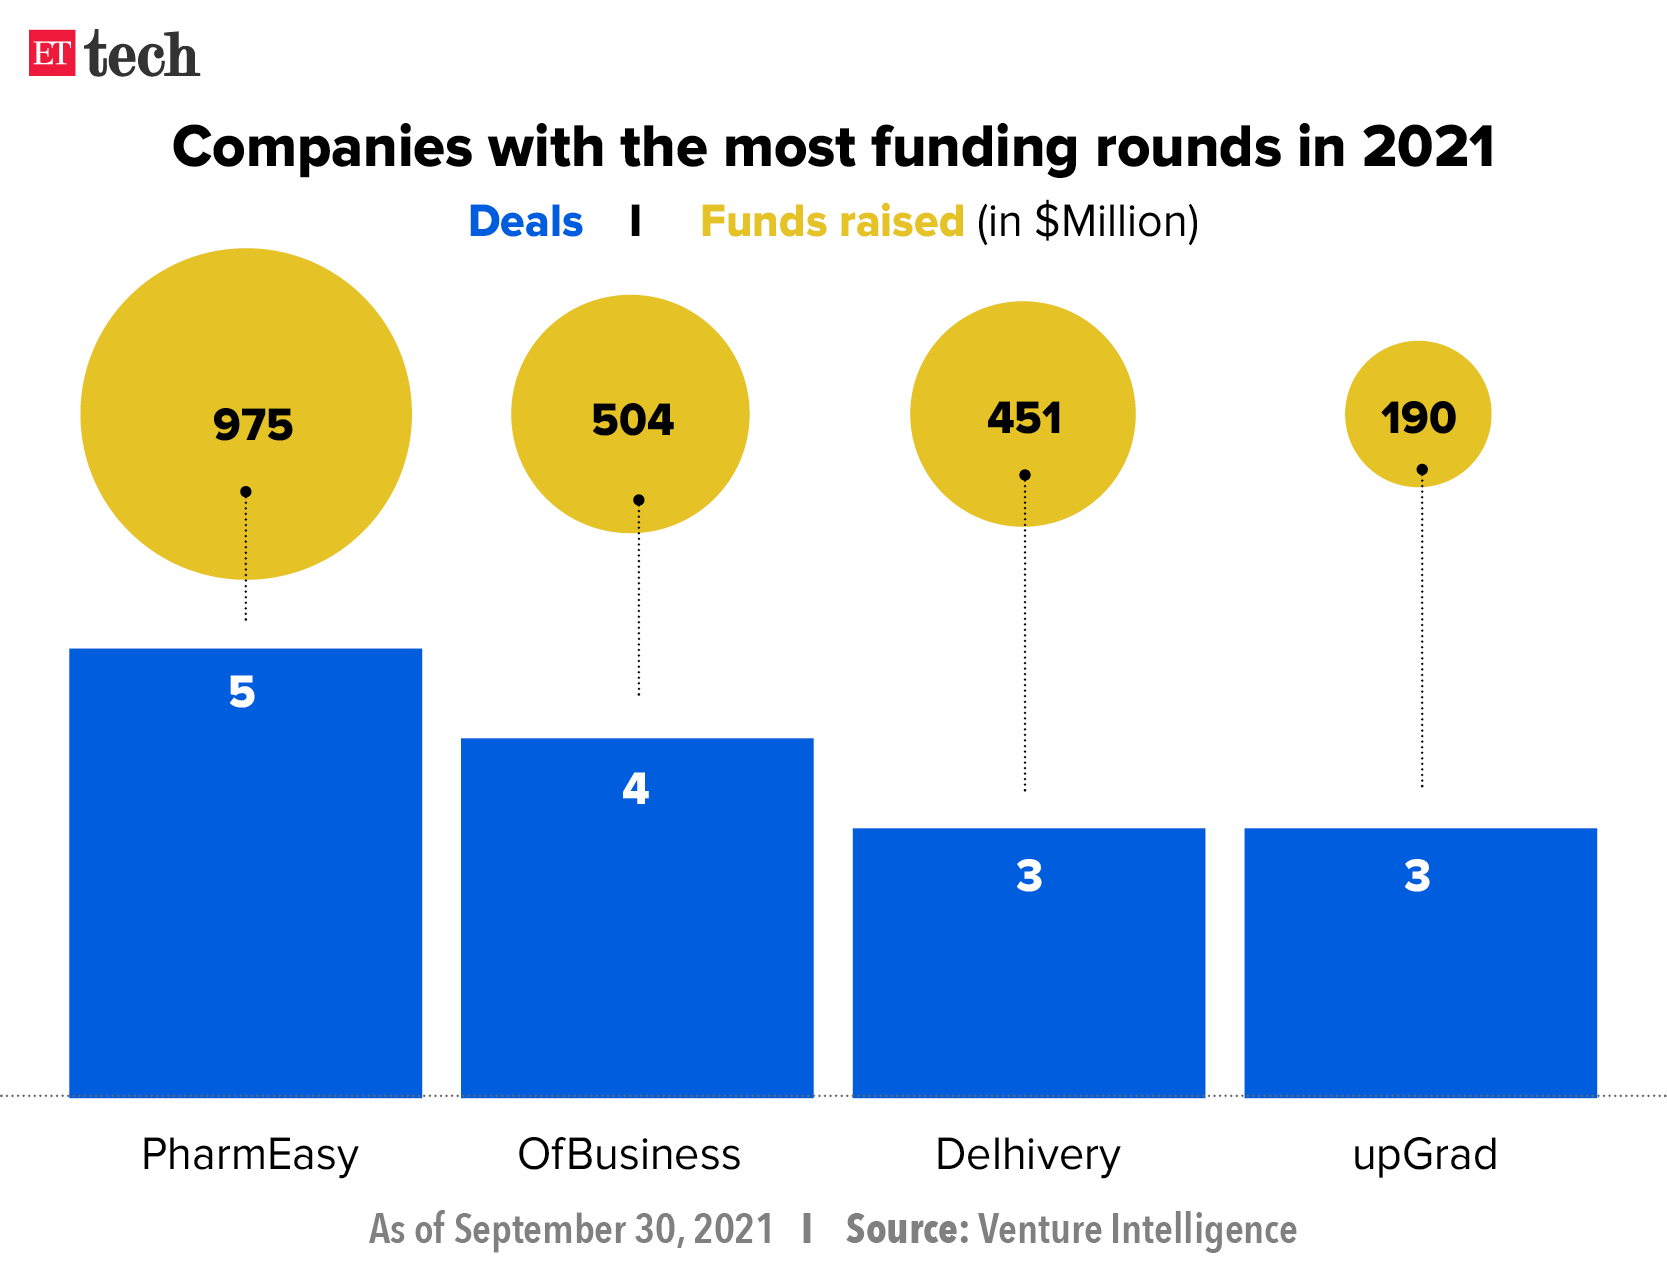 Companies with the most funding rounds in 2021